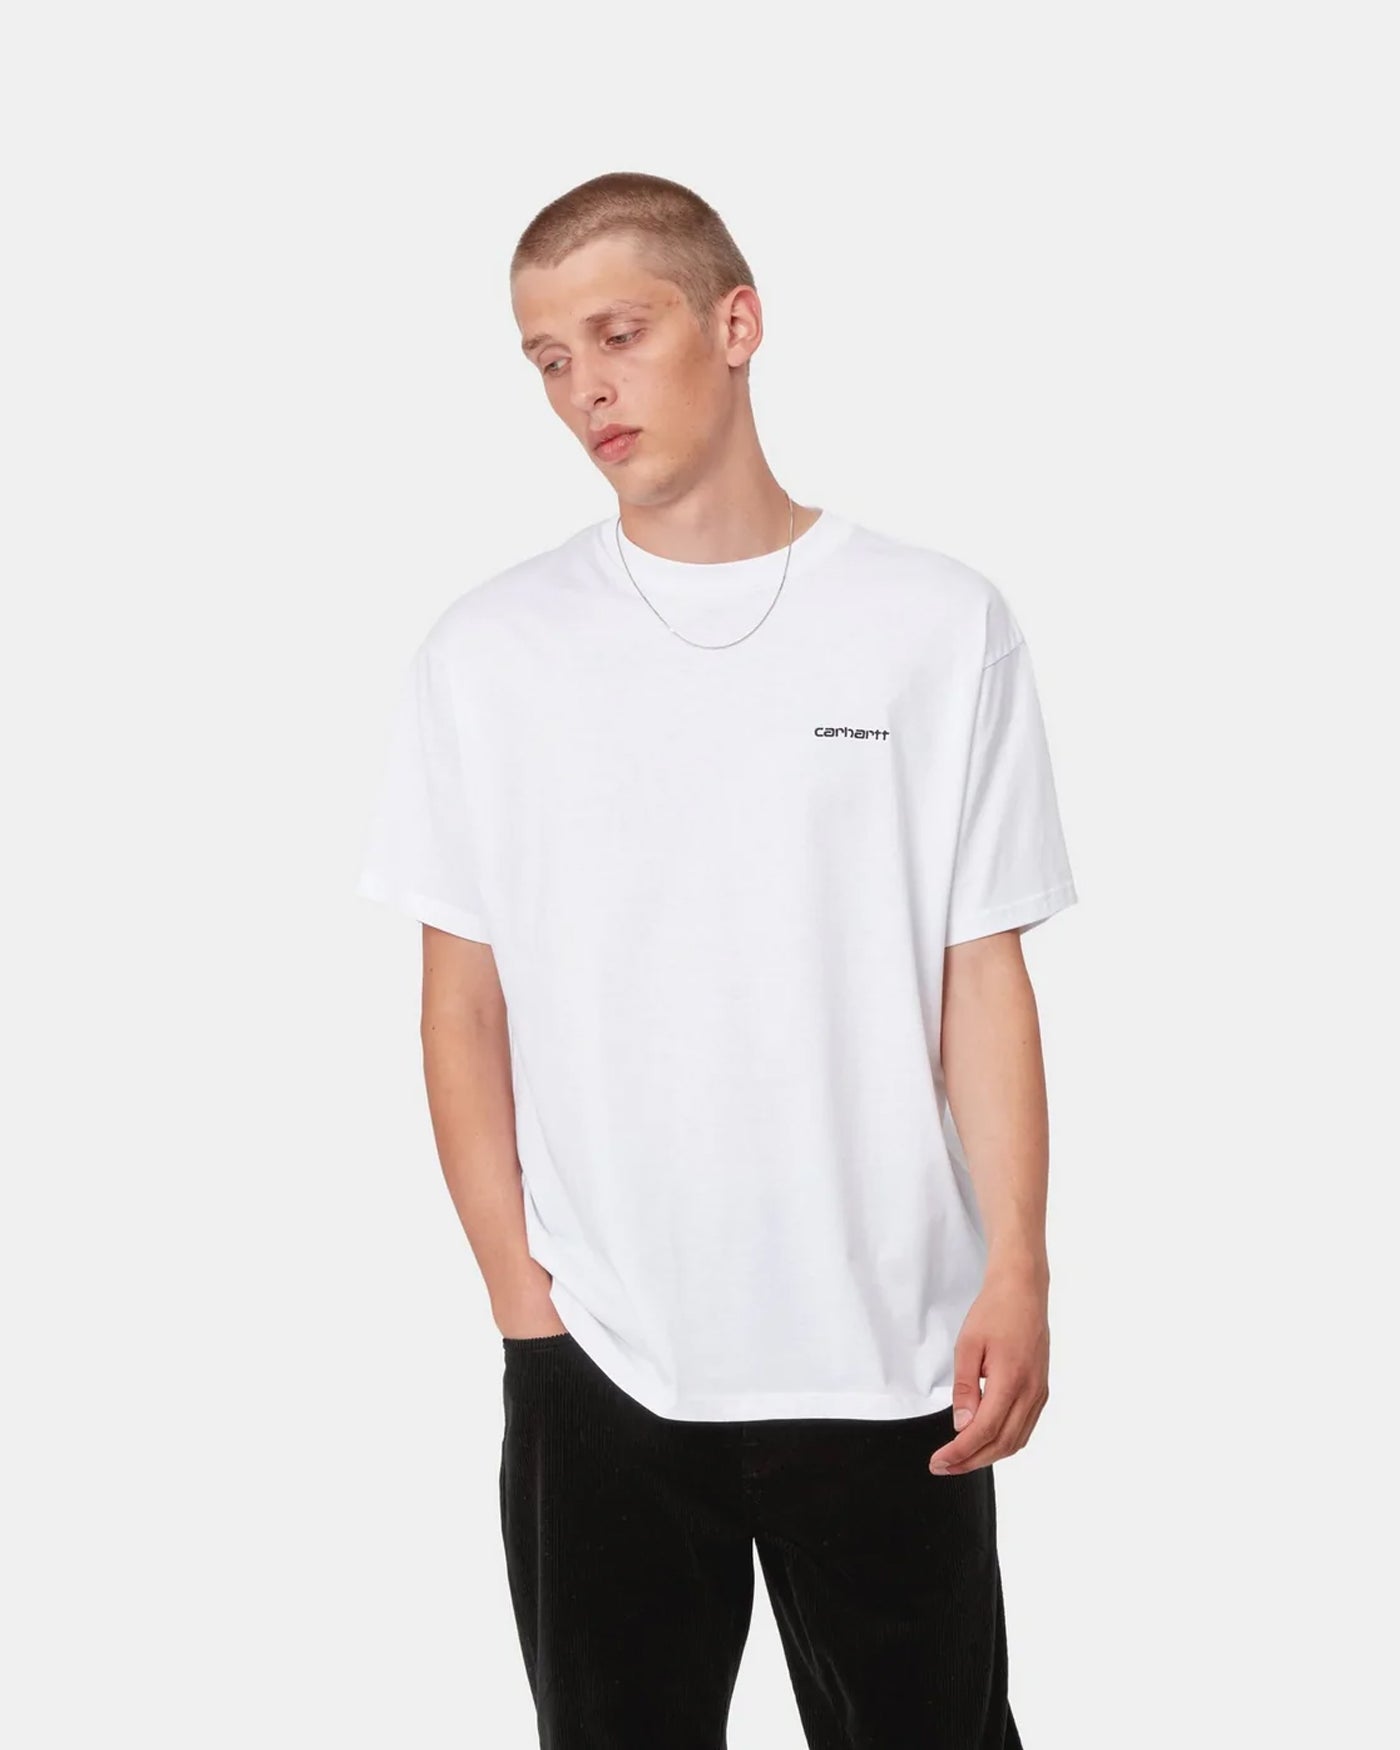 S/S Script Embroidery T-shirt